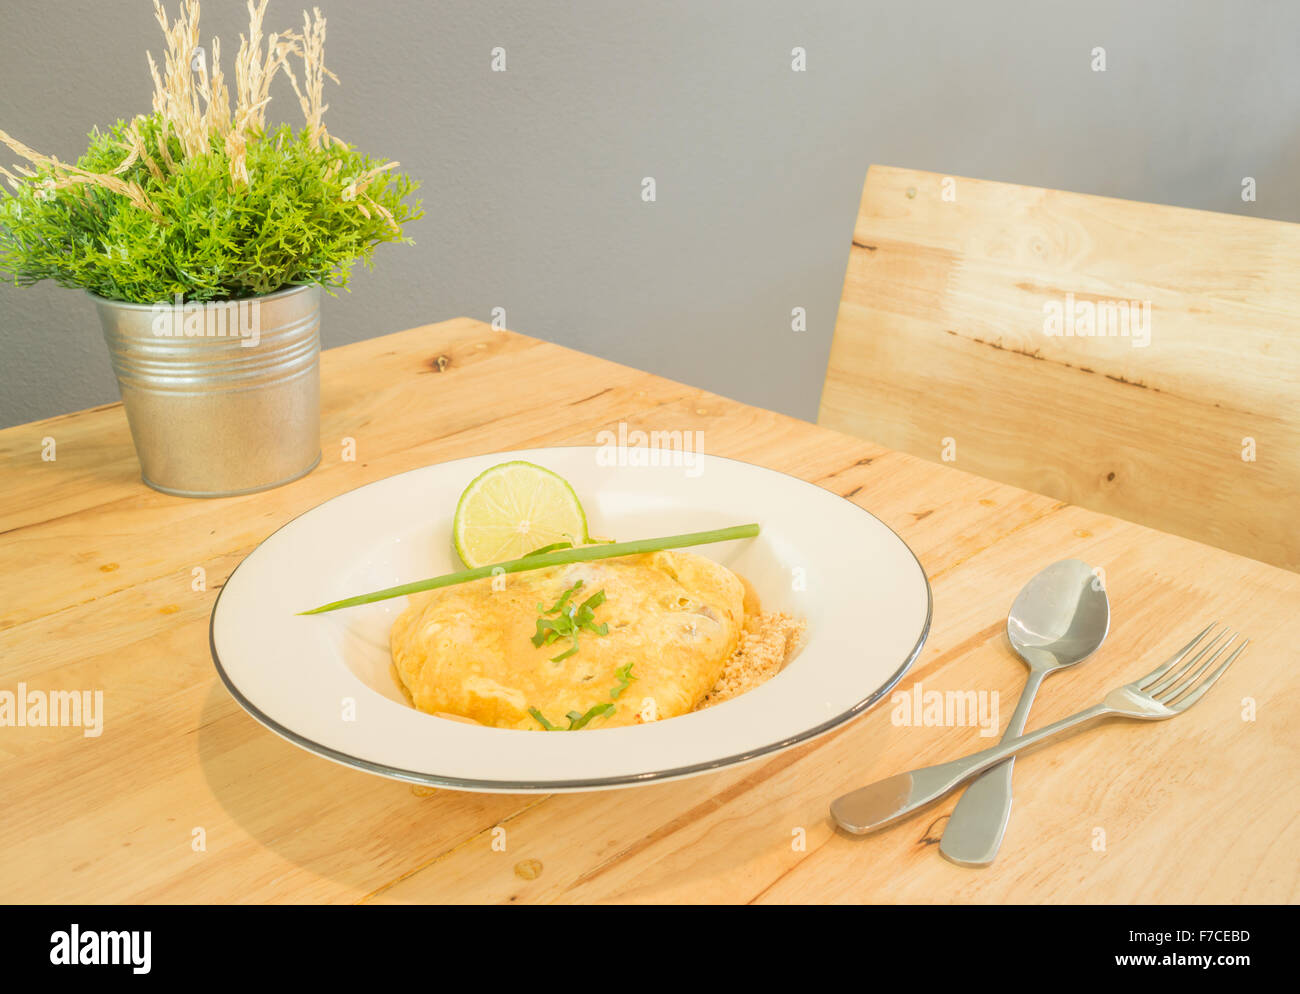 Pad Thai, stir-fried rice noodles with egg, stock photo Stock Photo